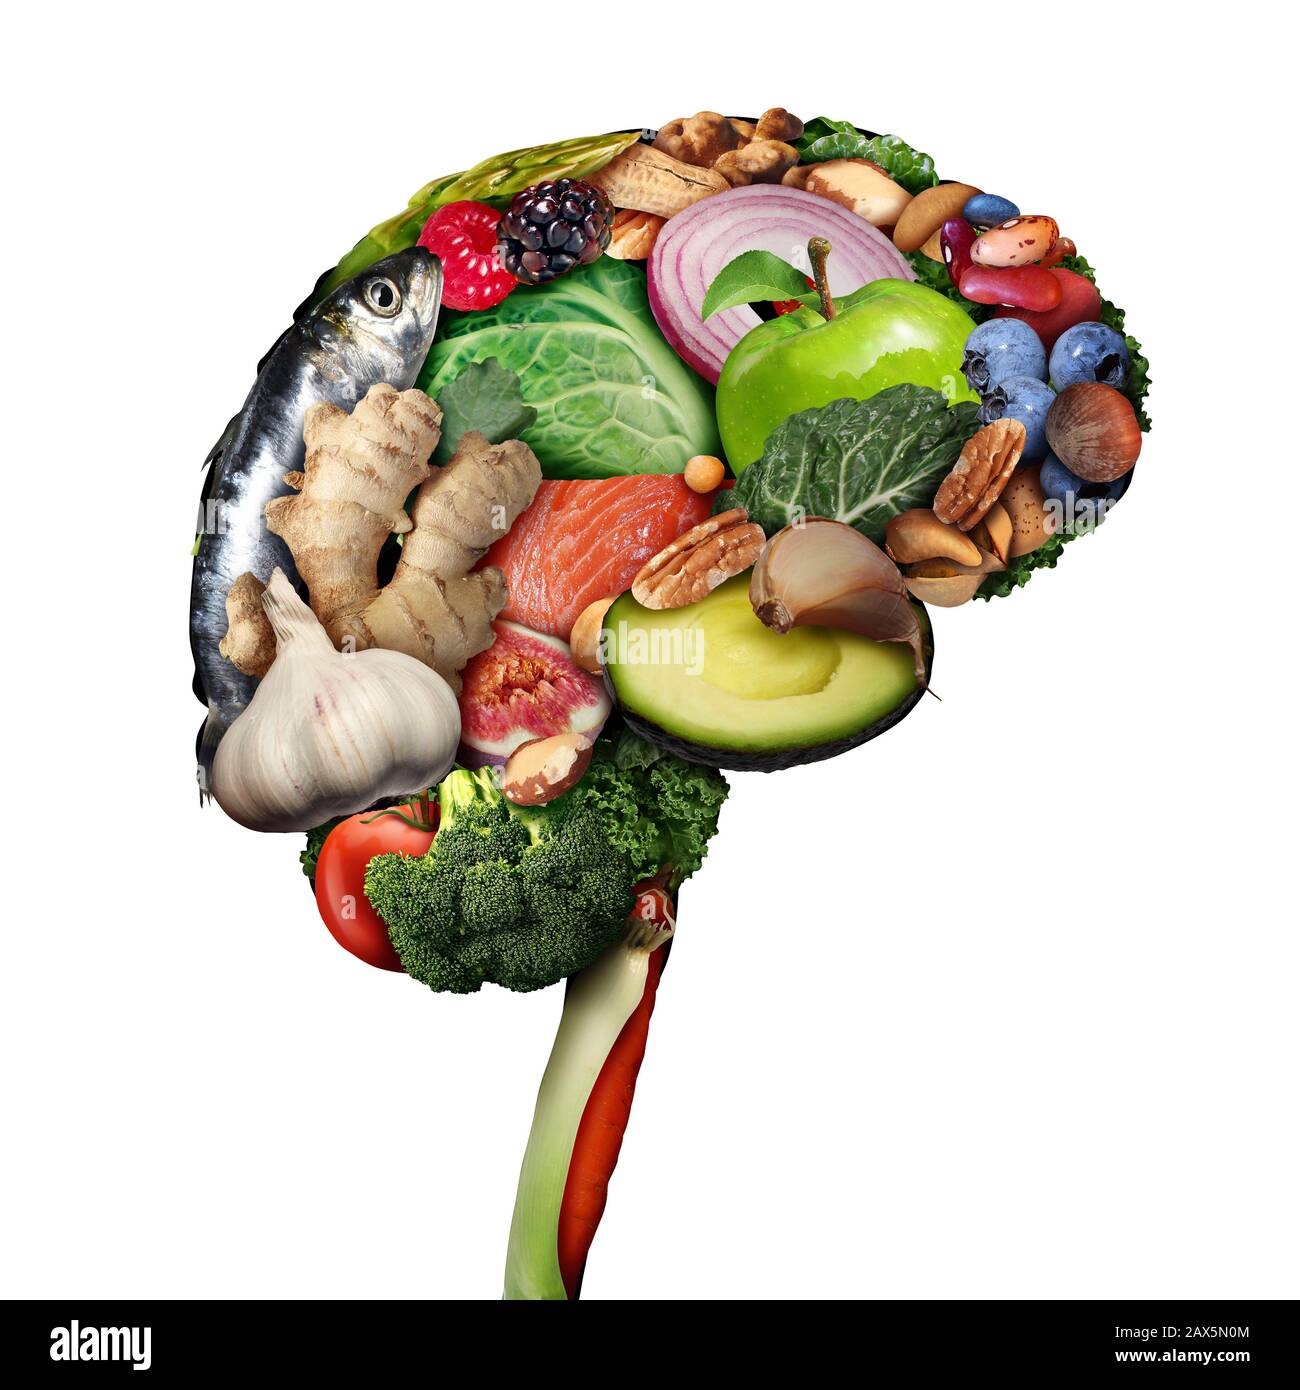 Healthy brain food to boost brainpower nutrition concept as a group of nutritious nuts fish vegetables and berries rich in omega-3 fatty acids. Stock Photo